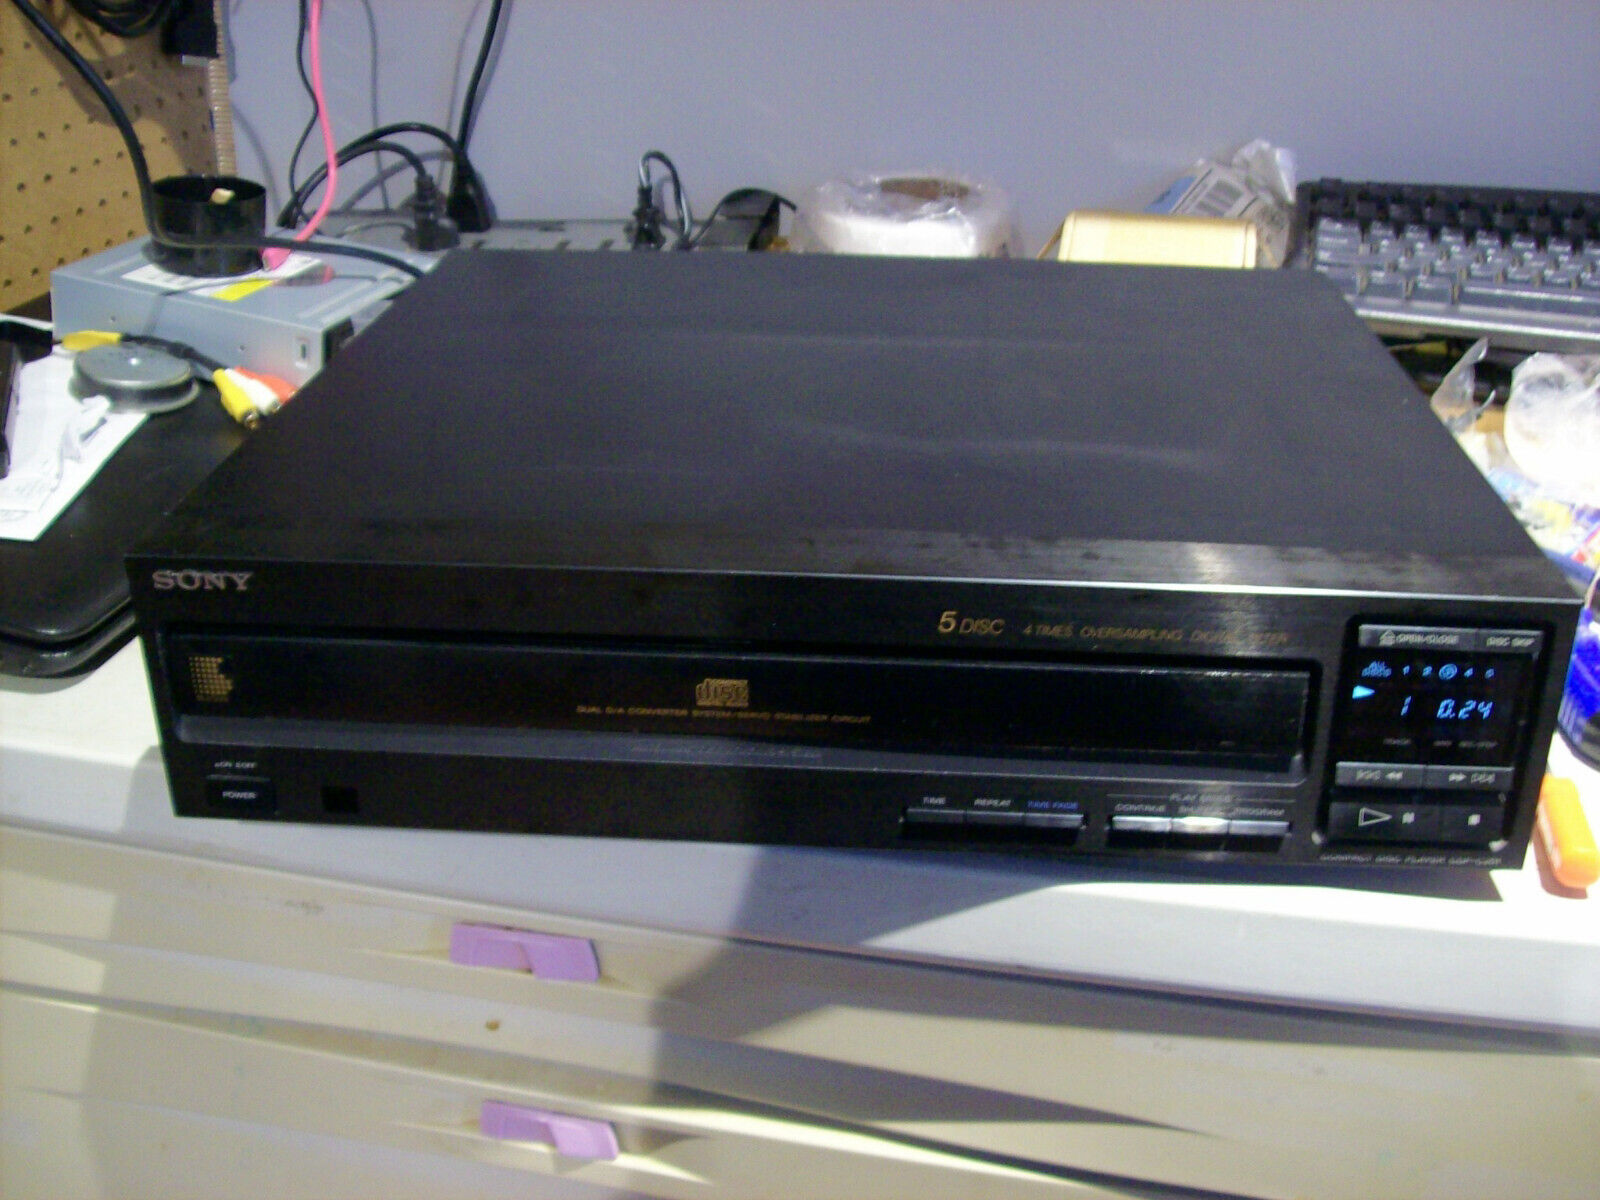 Sony CDP-C201 5 Disc CD Changer SERVICED - $120.00